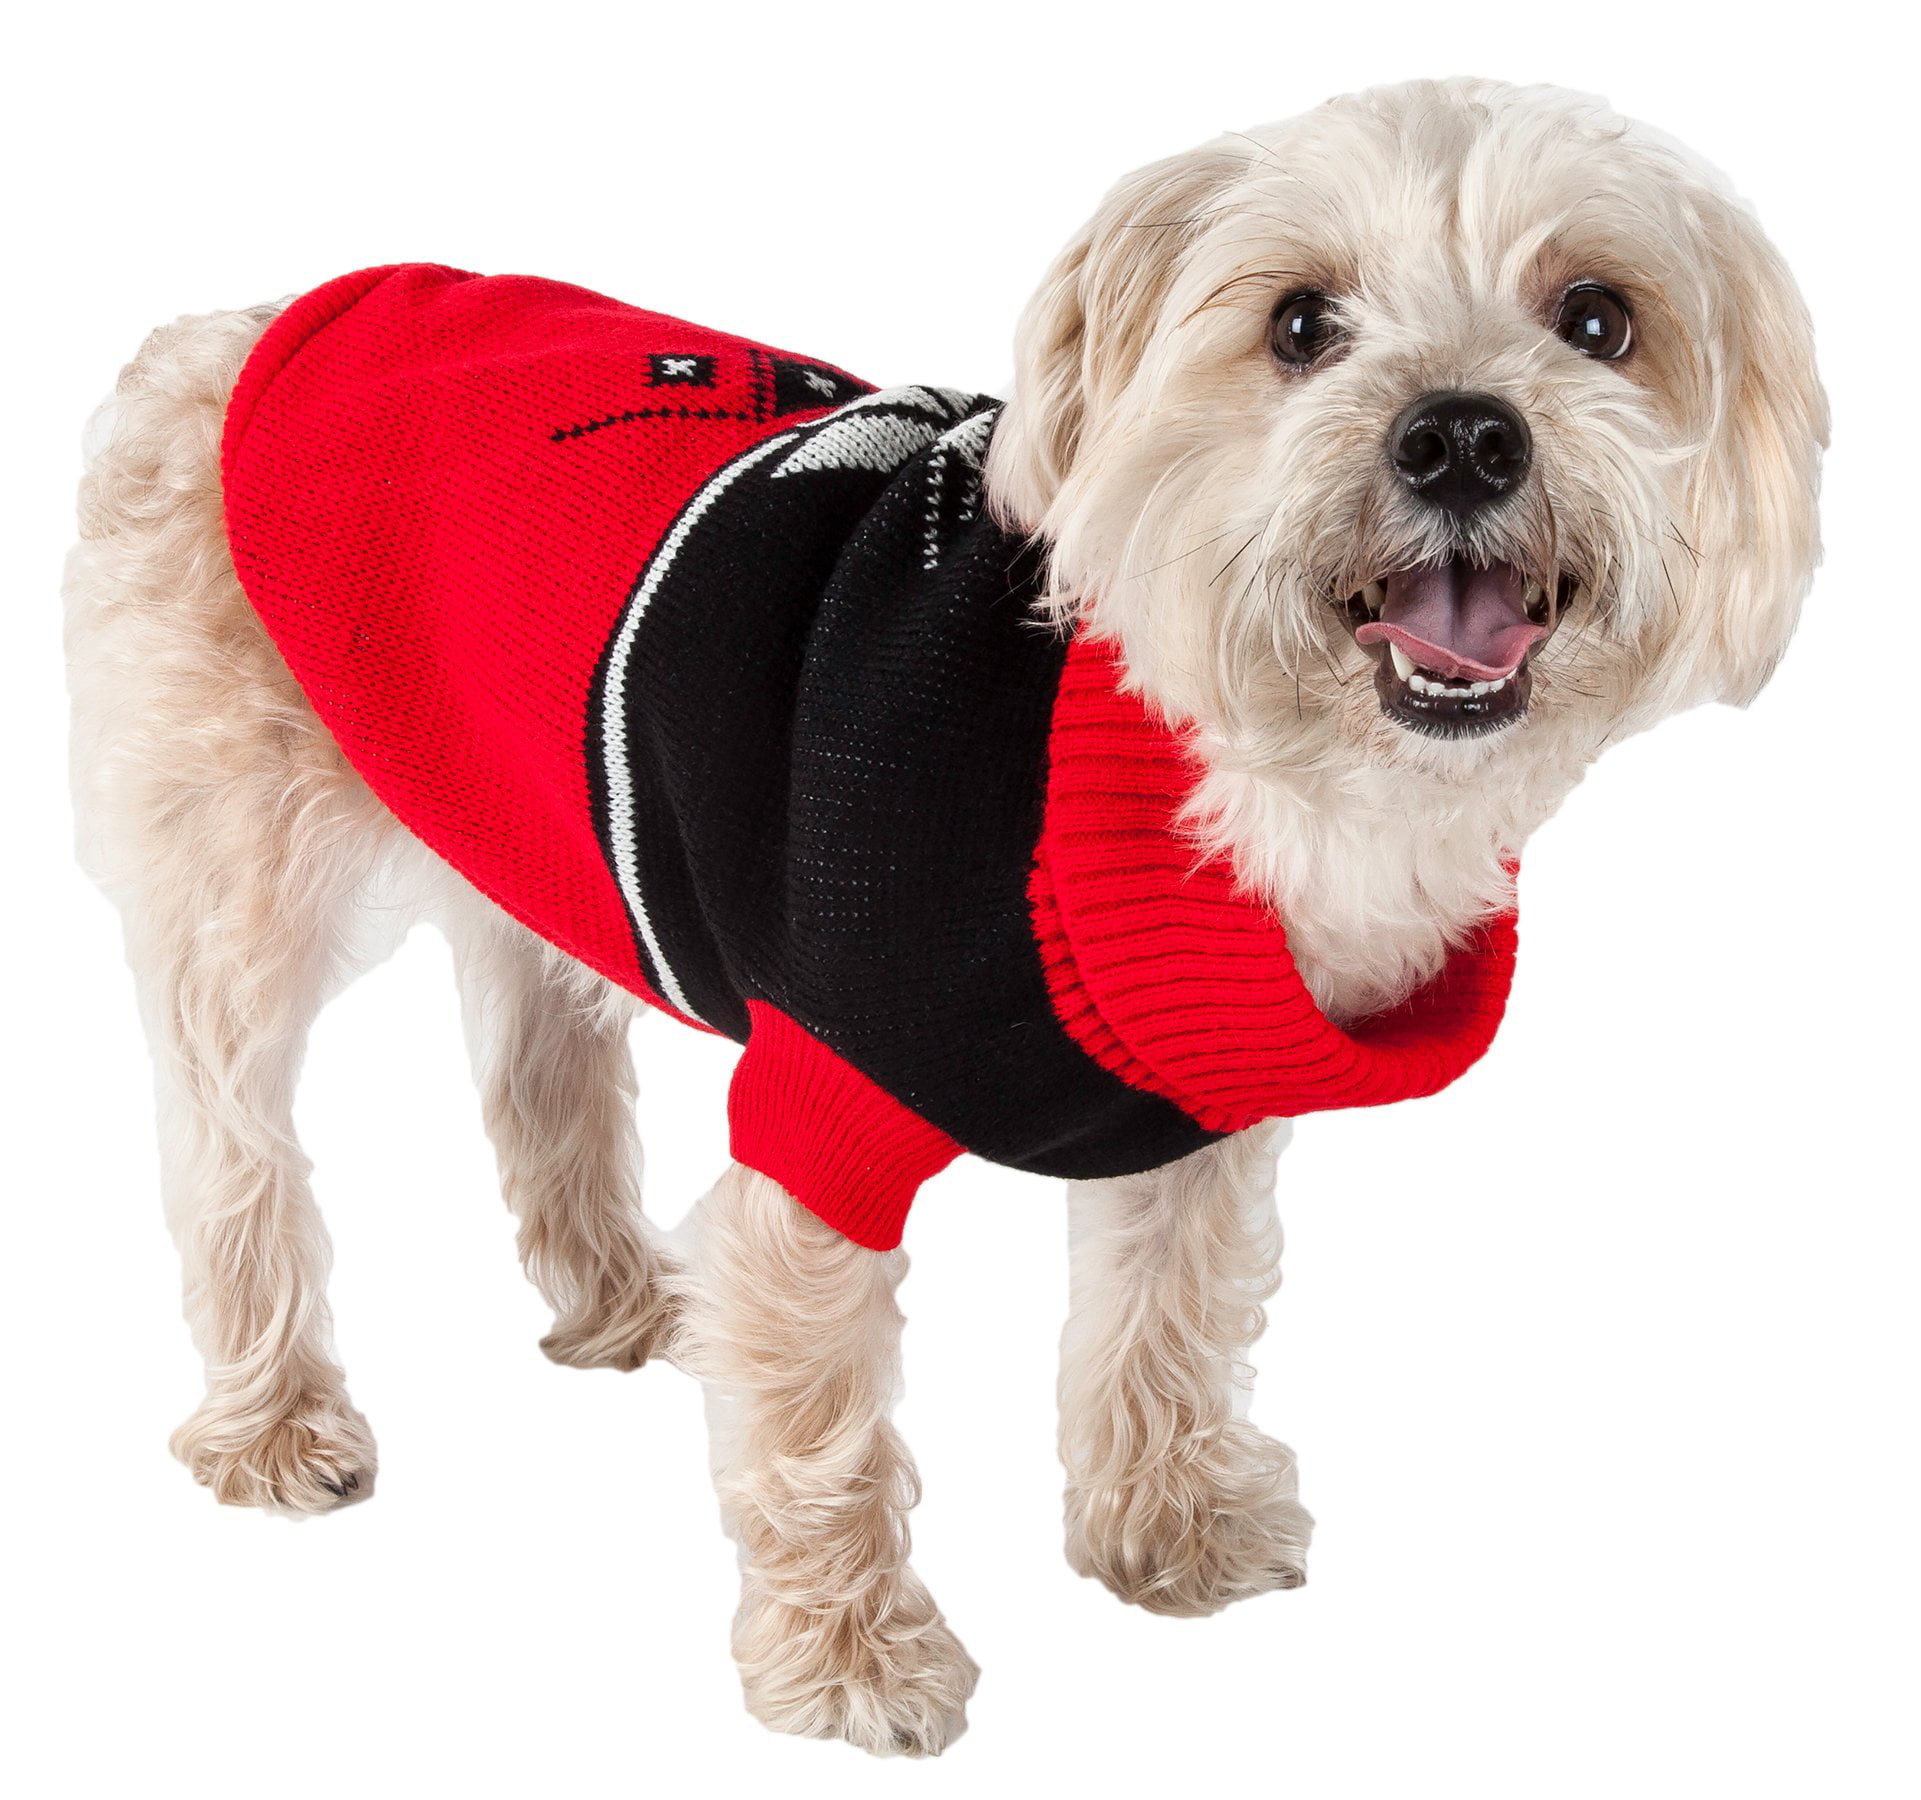 Pet Life Snow Flake Cable-Knit Ribbed Fashion Turtle Neck Dog Sweater